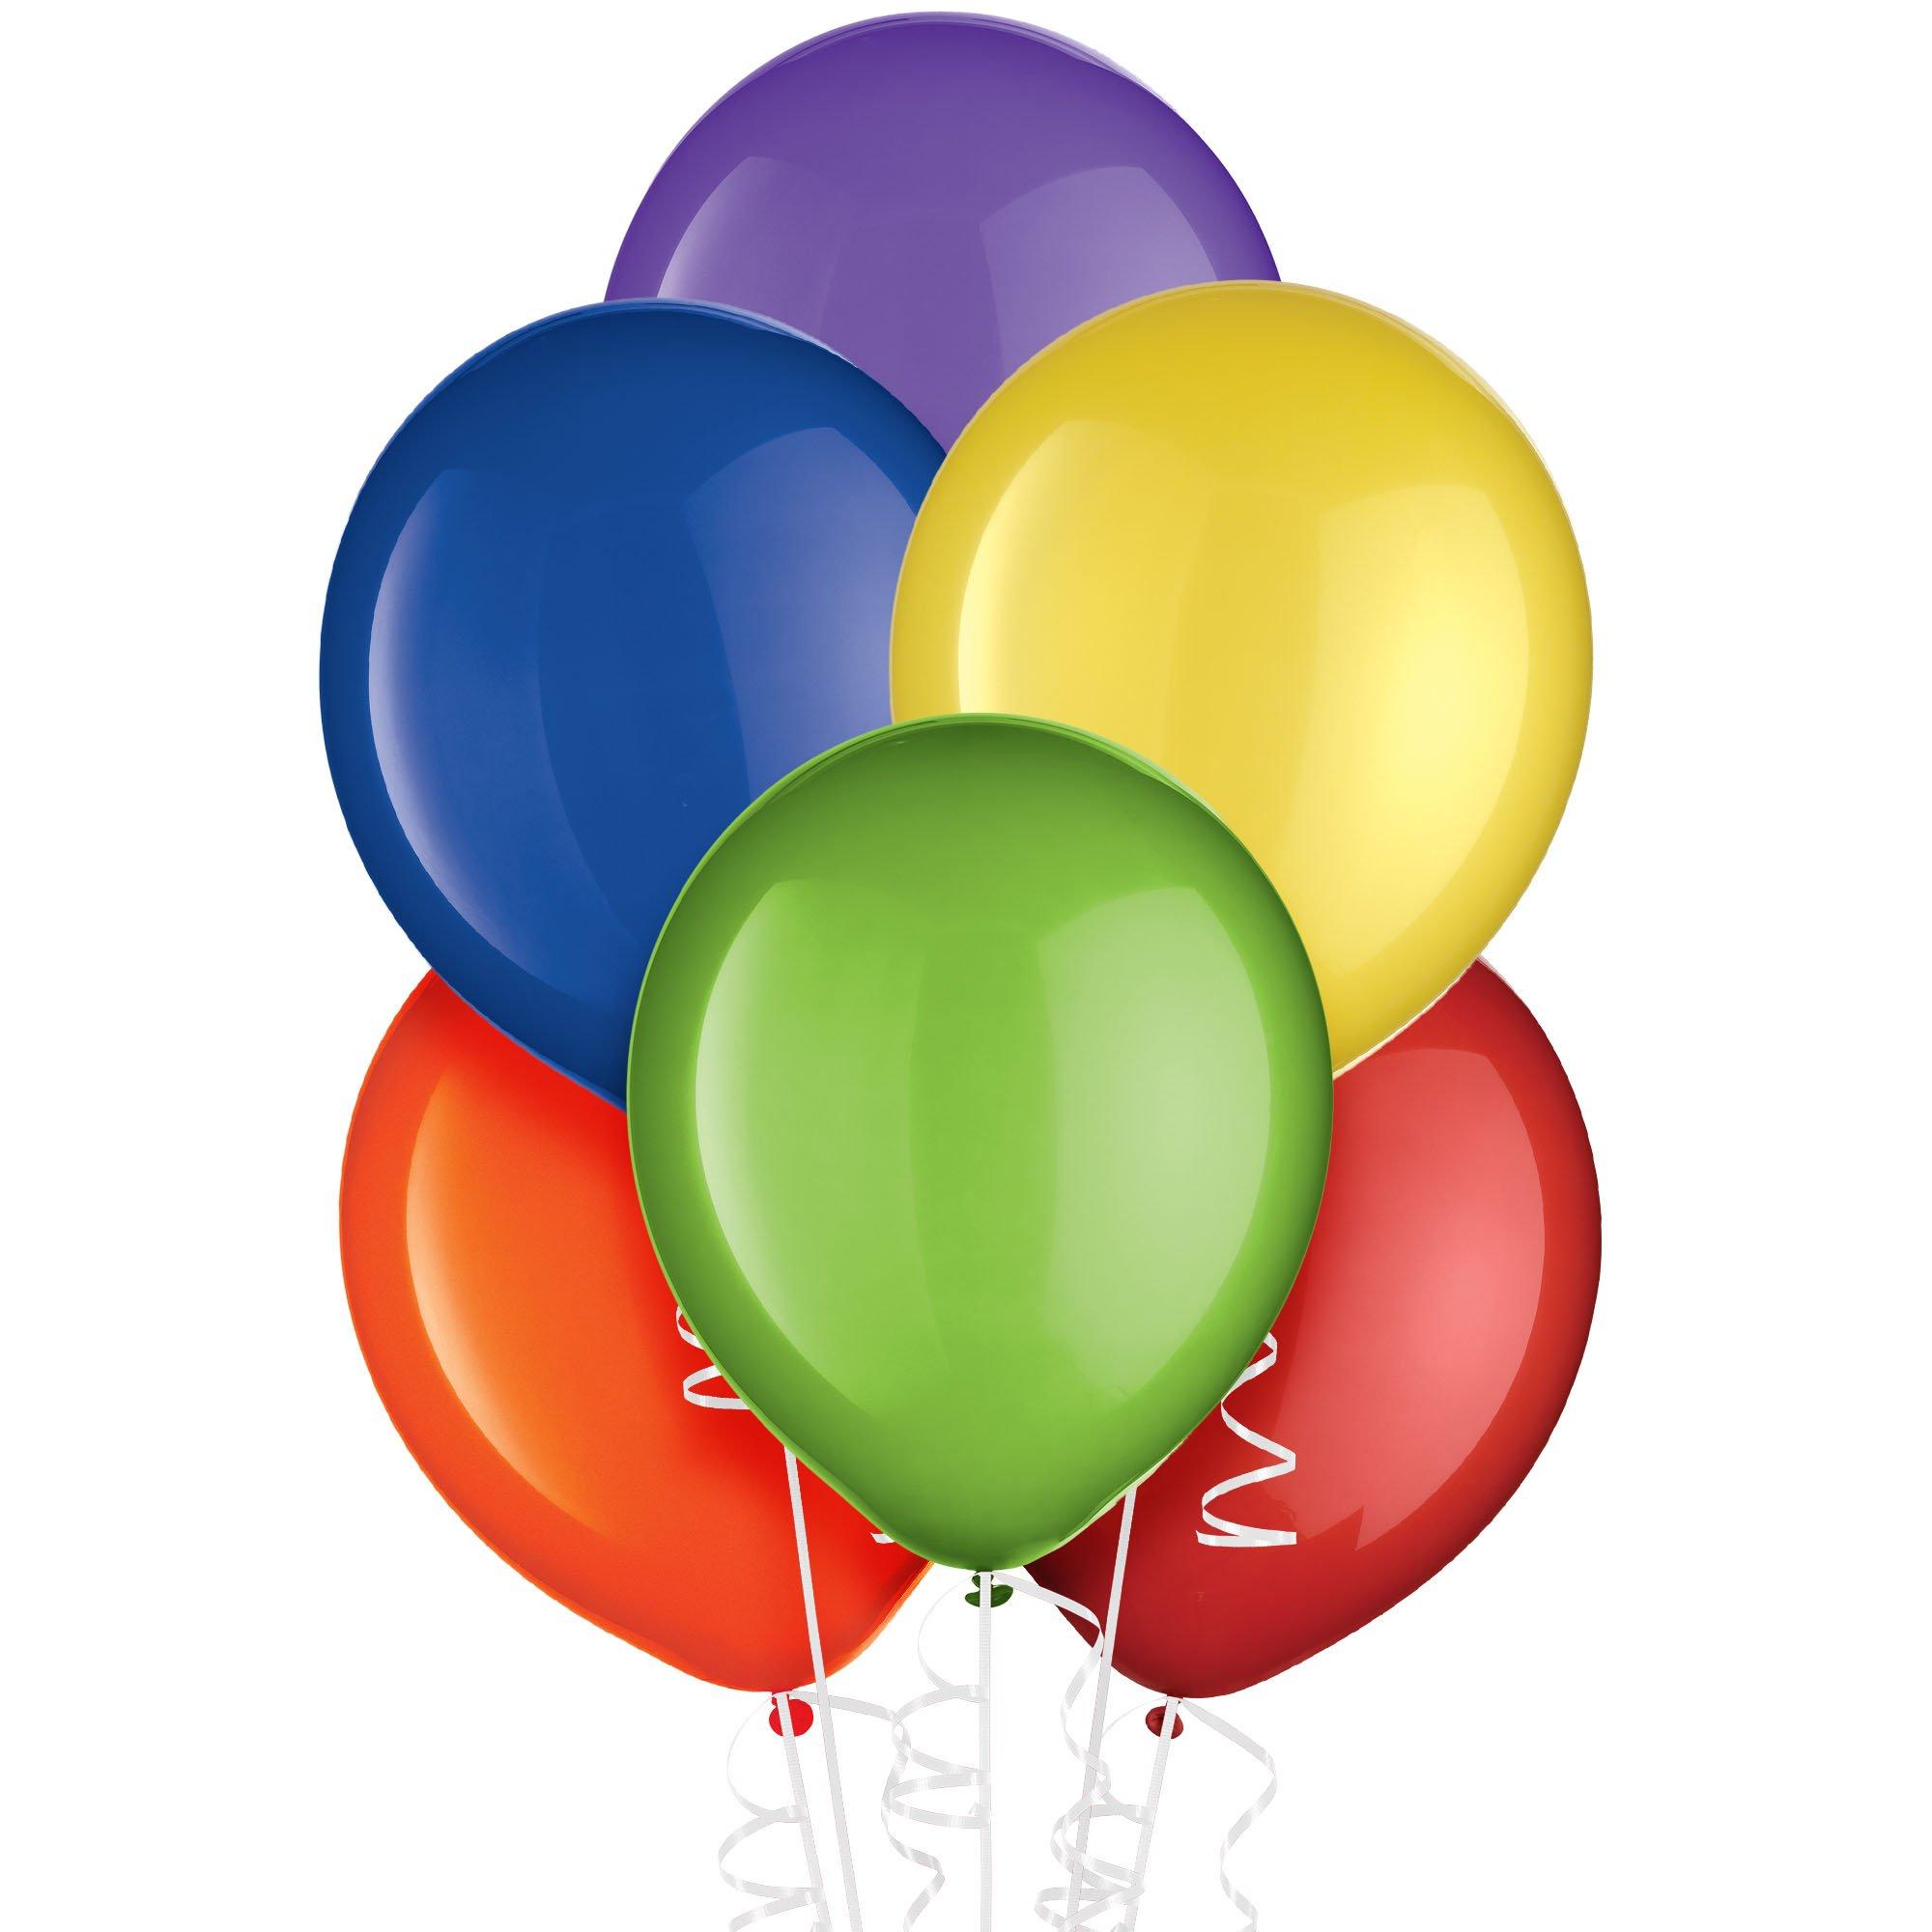 Happy Birthday Rainbow Mix Balloon Bouquet (12 Balloons) - Balloon Delivery  by